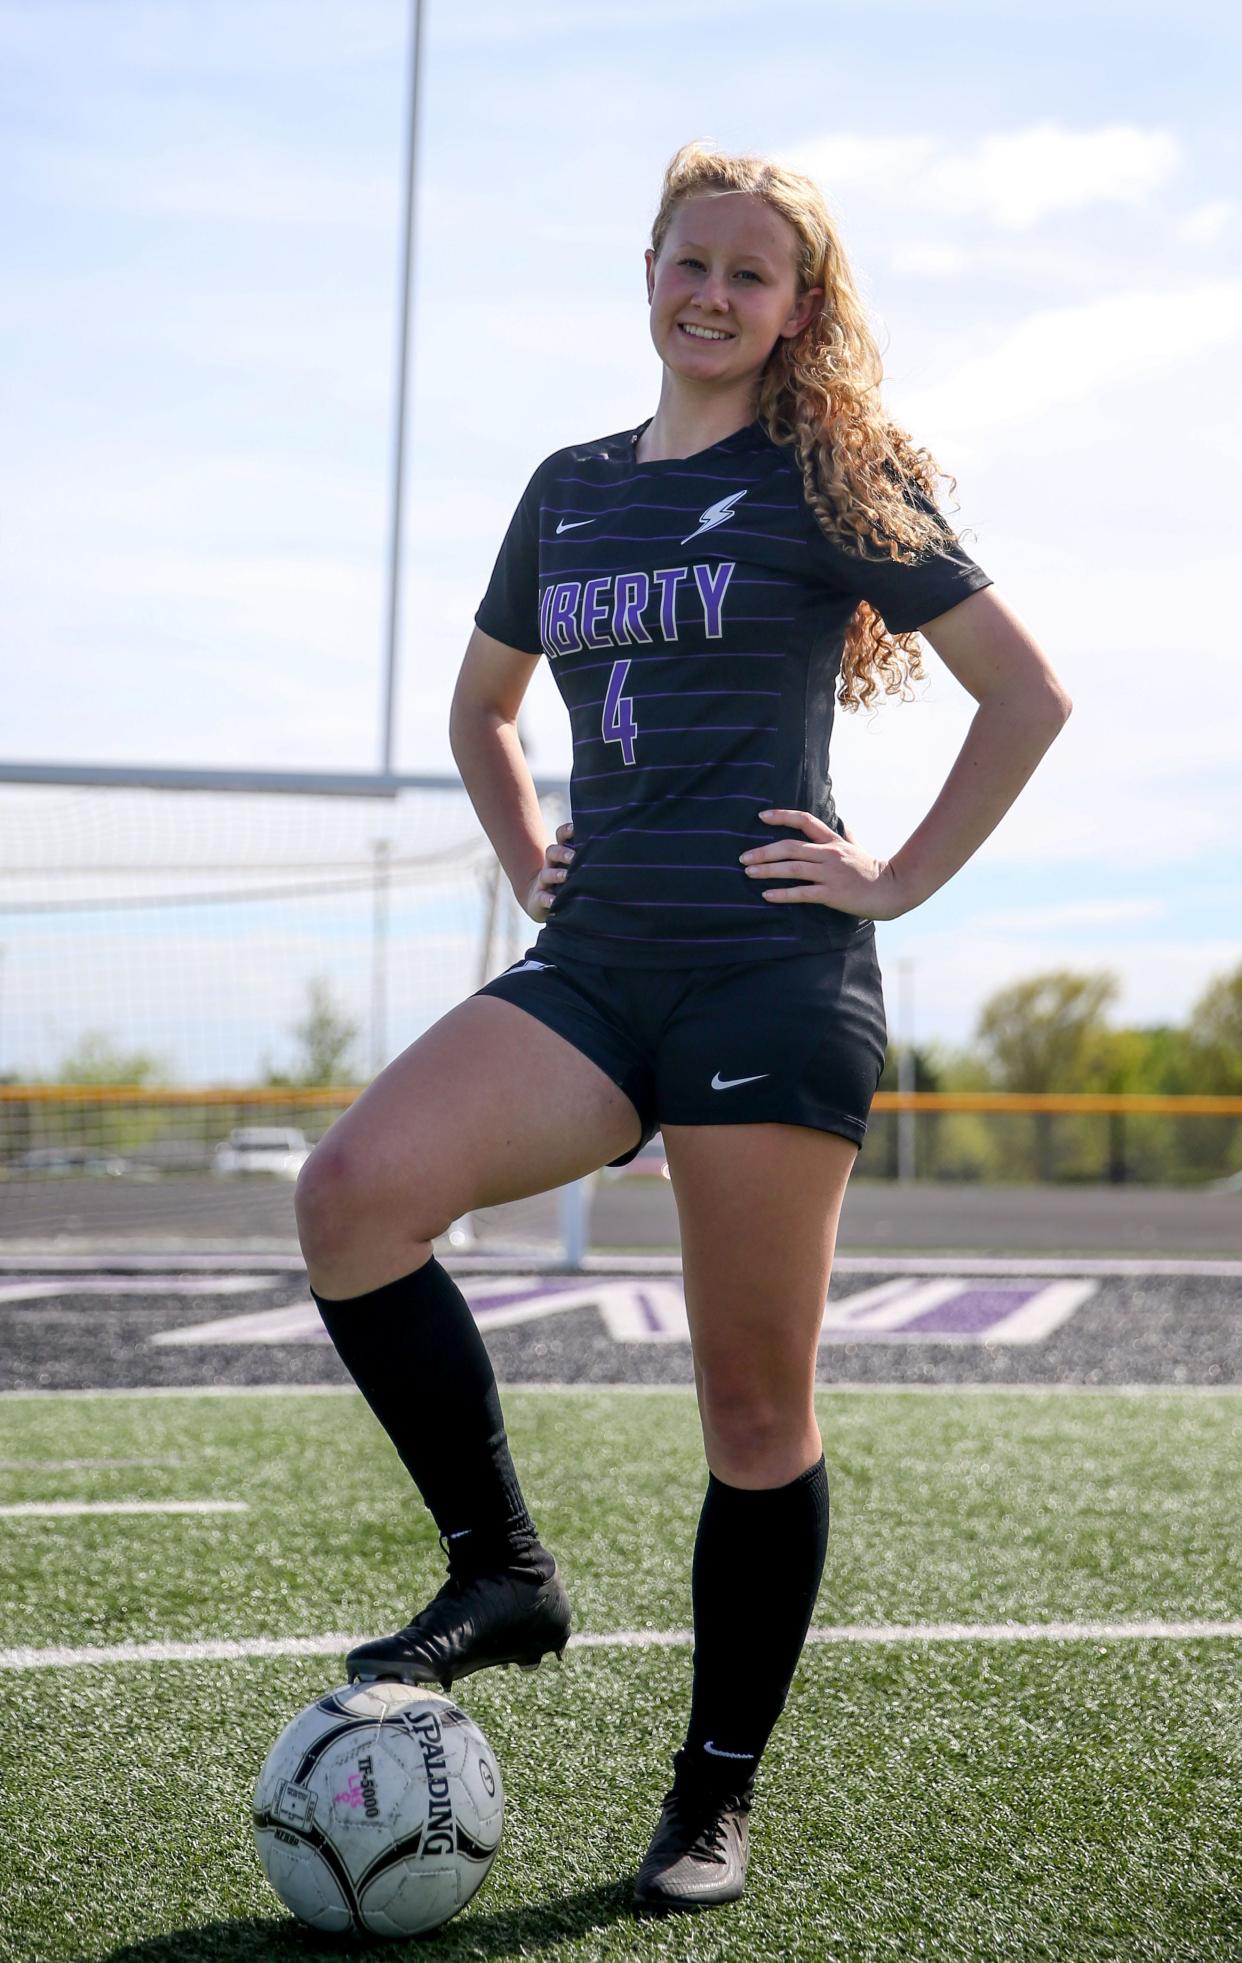 Rilyn Breinholt poses for a portrait at Liberty High School in North Liberty, Iowa.